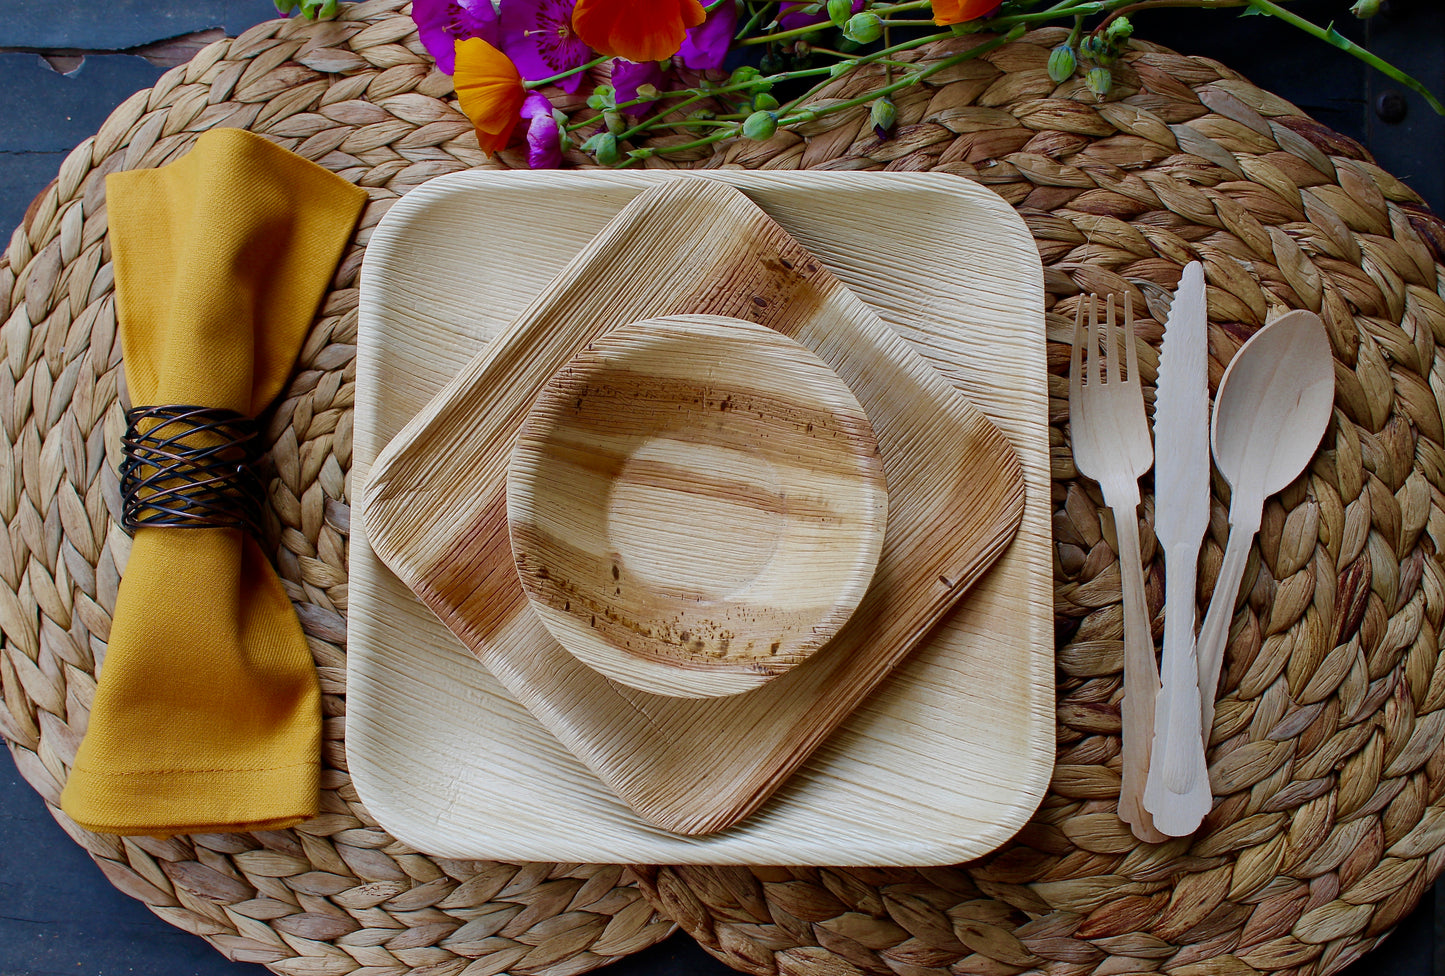 Palm leaf plate 25 pices 9.5" Square plates ane 75 pices cutlery compostable and Biodegradable heavy Duty - event - party